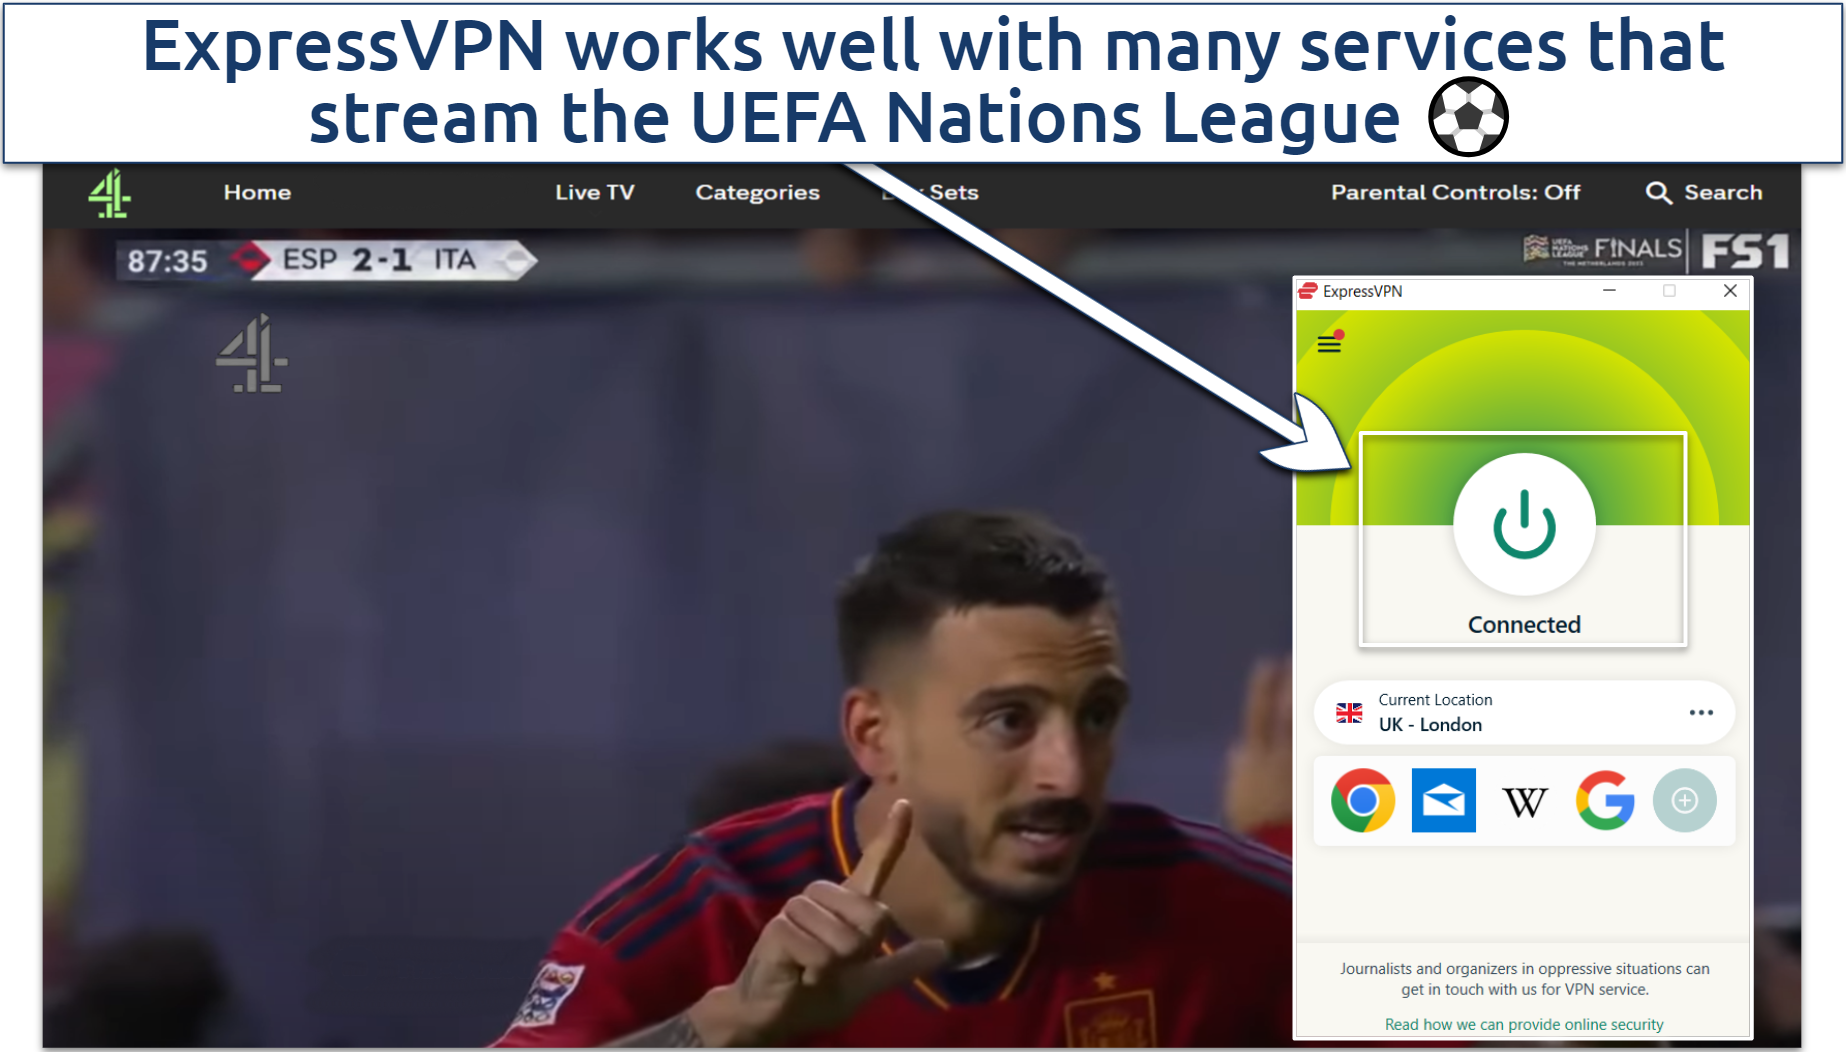 Screenshot of a UEFA Nations League game streaming through Channel 4 with ExpressVPN connected